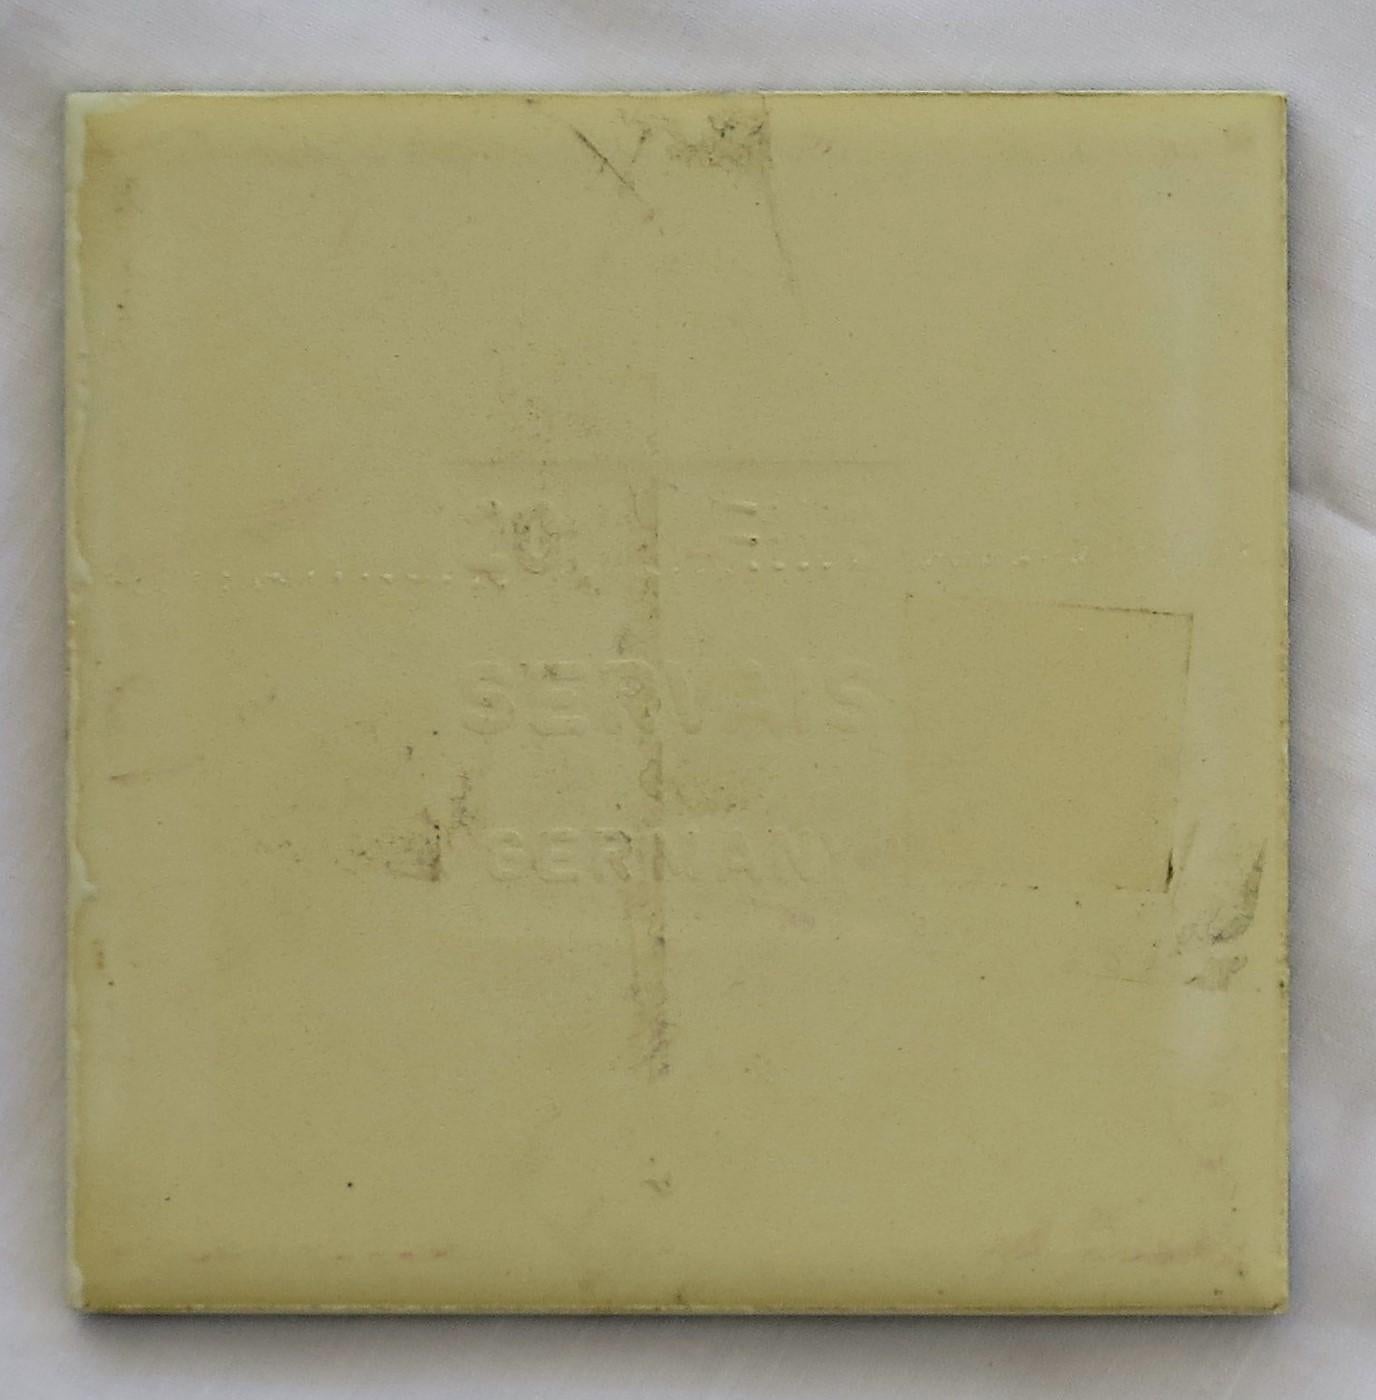 Set of Eleven Ceramic Wall Tiles by Servais of Germany Set 1, circa 1950 11